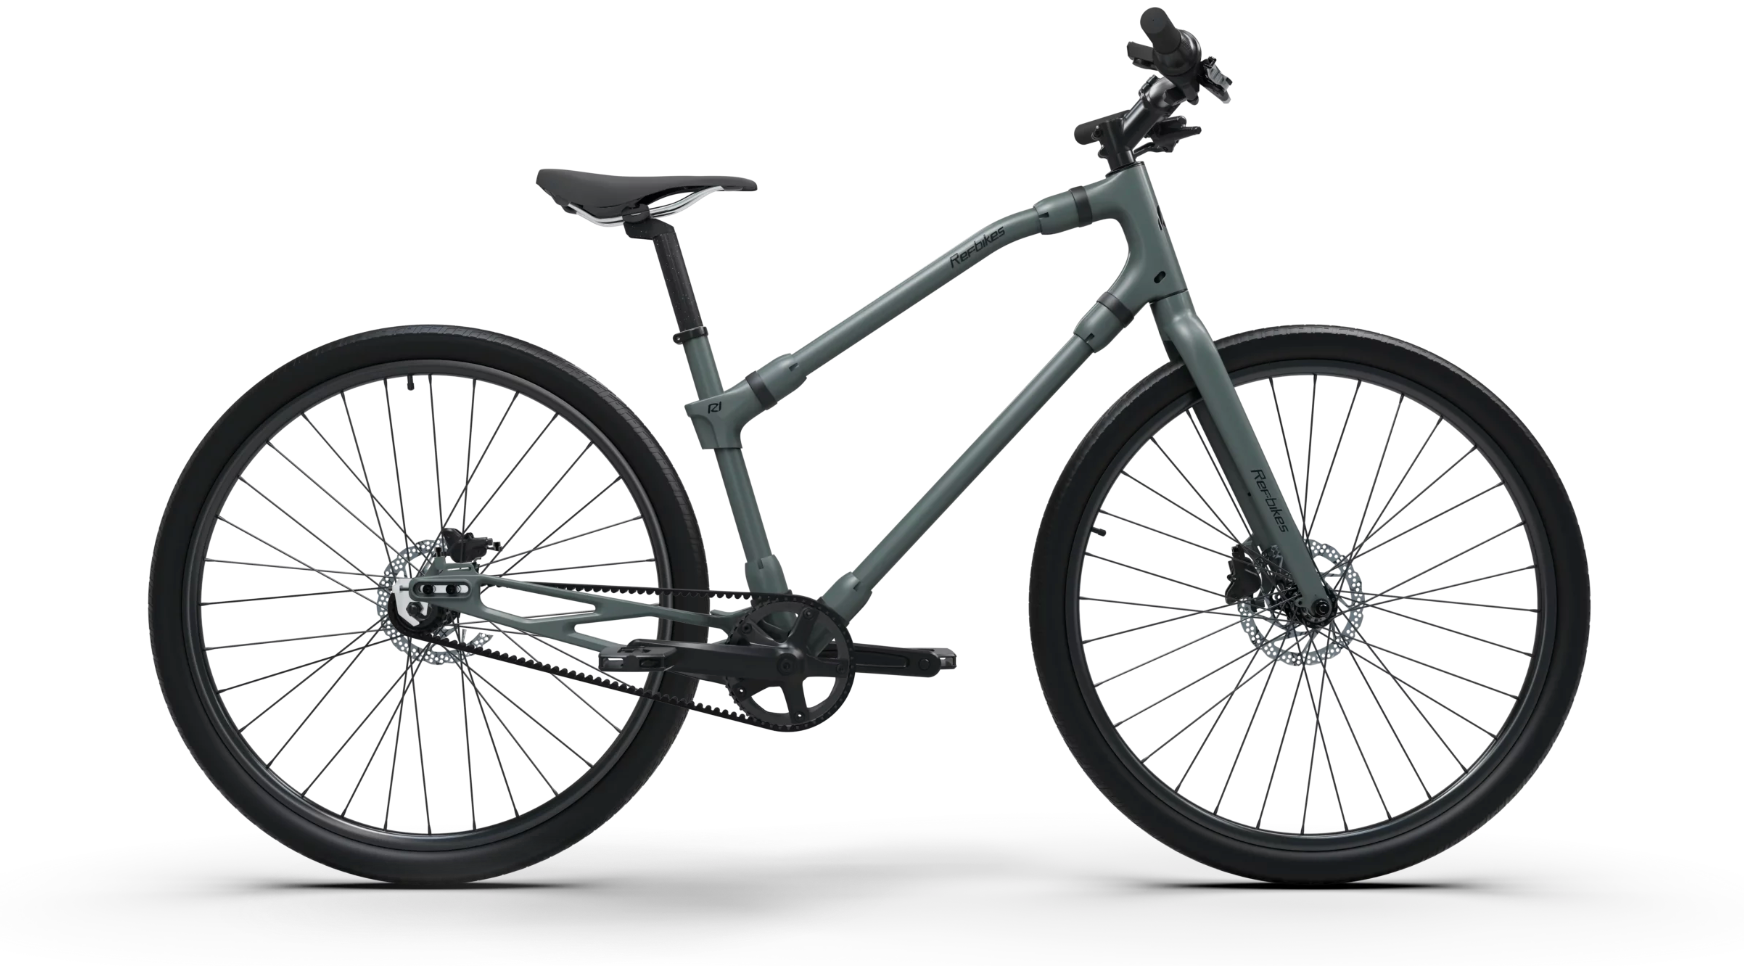 Contemporary gray Ref Essential bike profile view, featuring its elegant frame and efficient design for the modern rider.